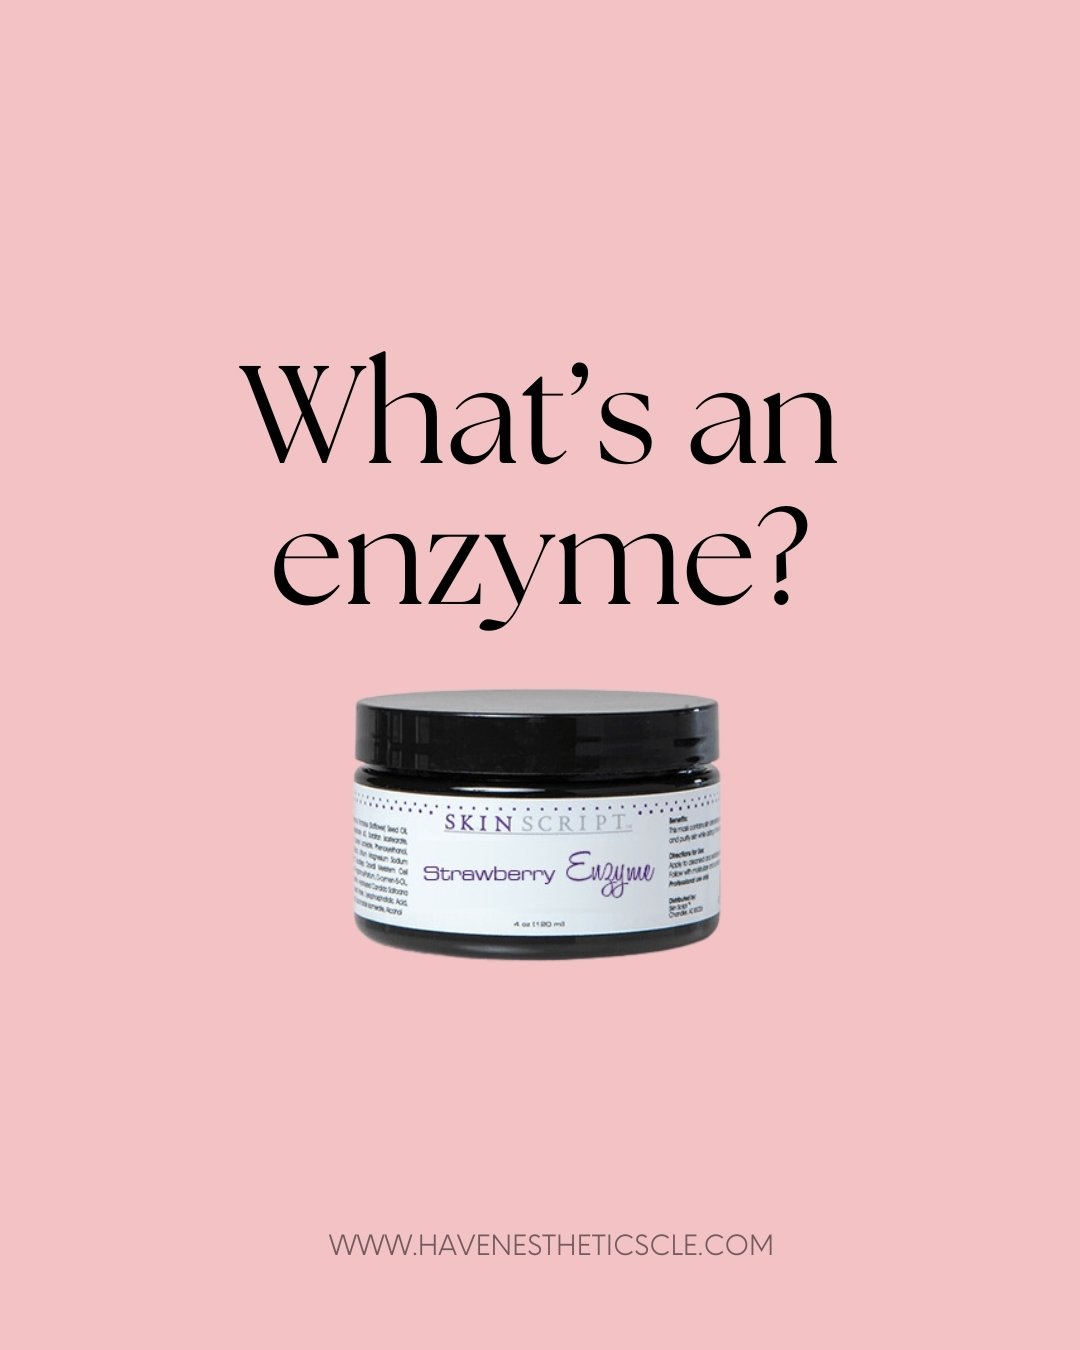 Enzymes digest dead skin cells on the surface of the skin, which can dislodge clogs in the follicles, soften skin, prep for extractions and improve tone.

We love to start facials with enzyme treatments because of how well they prepare skin for what'